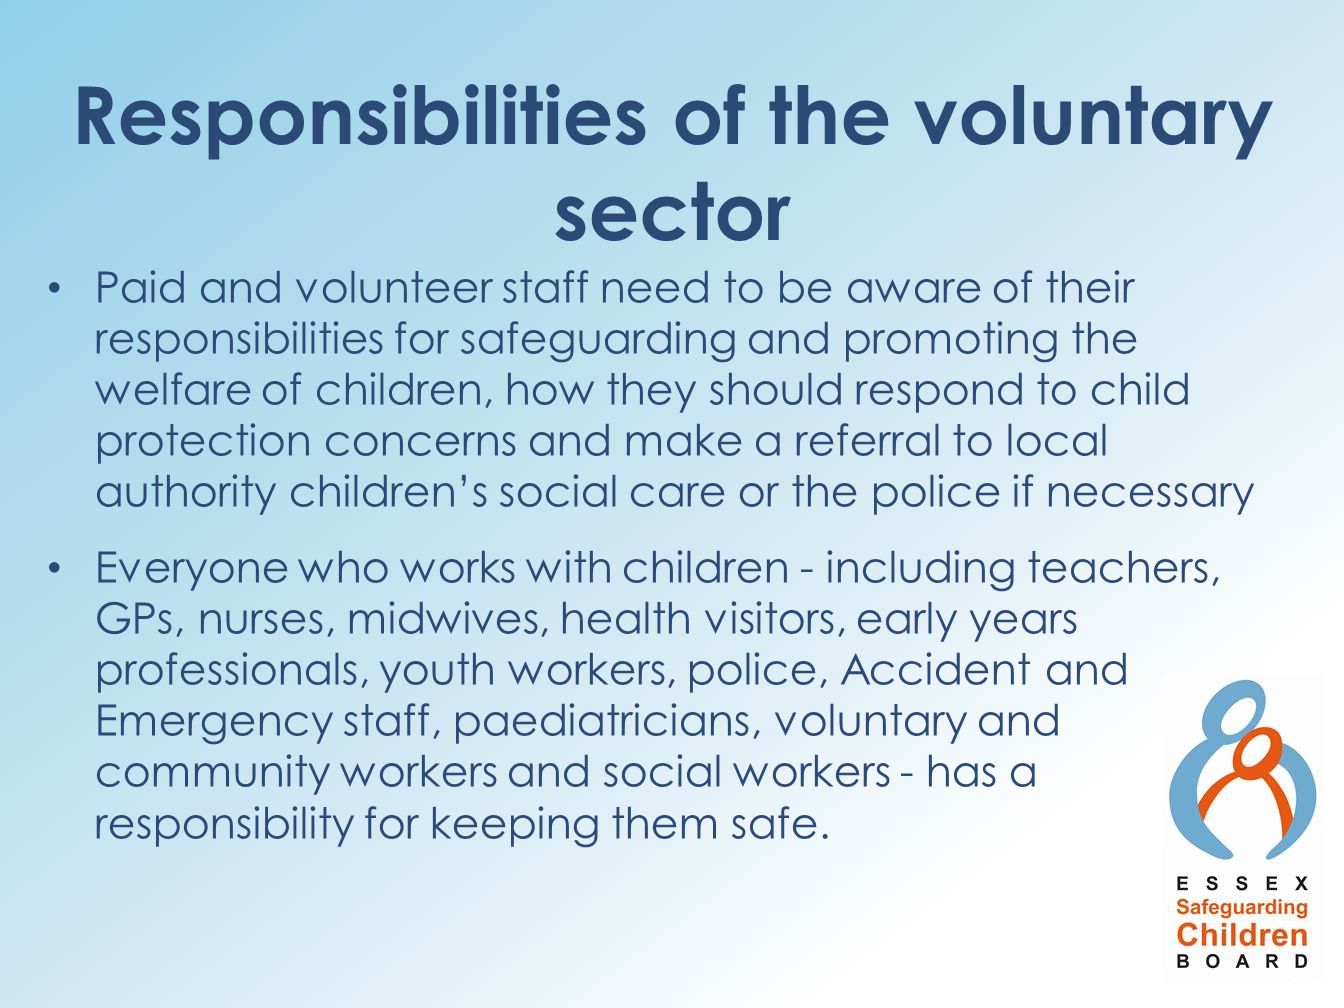 Responsibilities of the voluntary sector